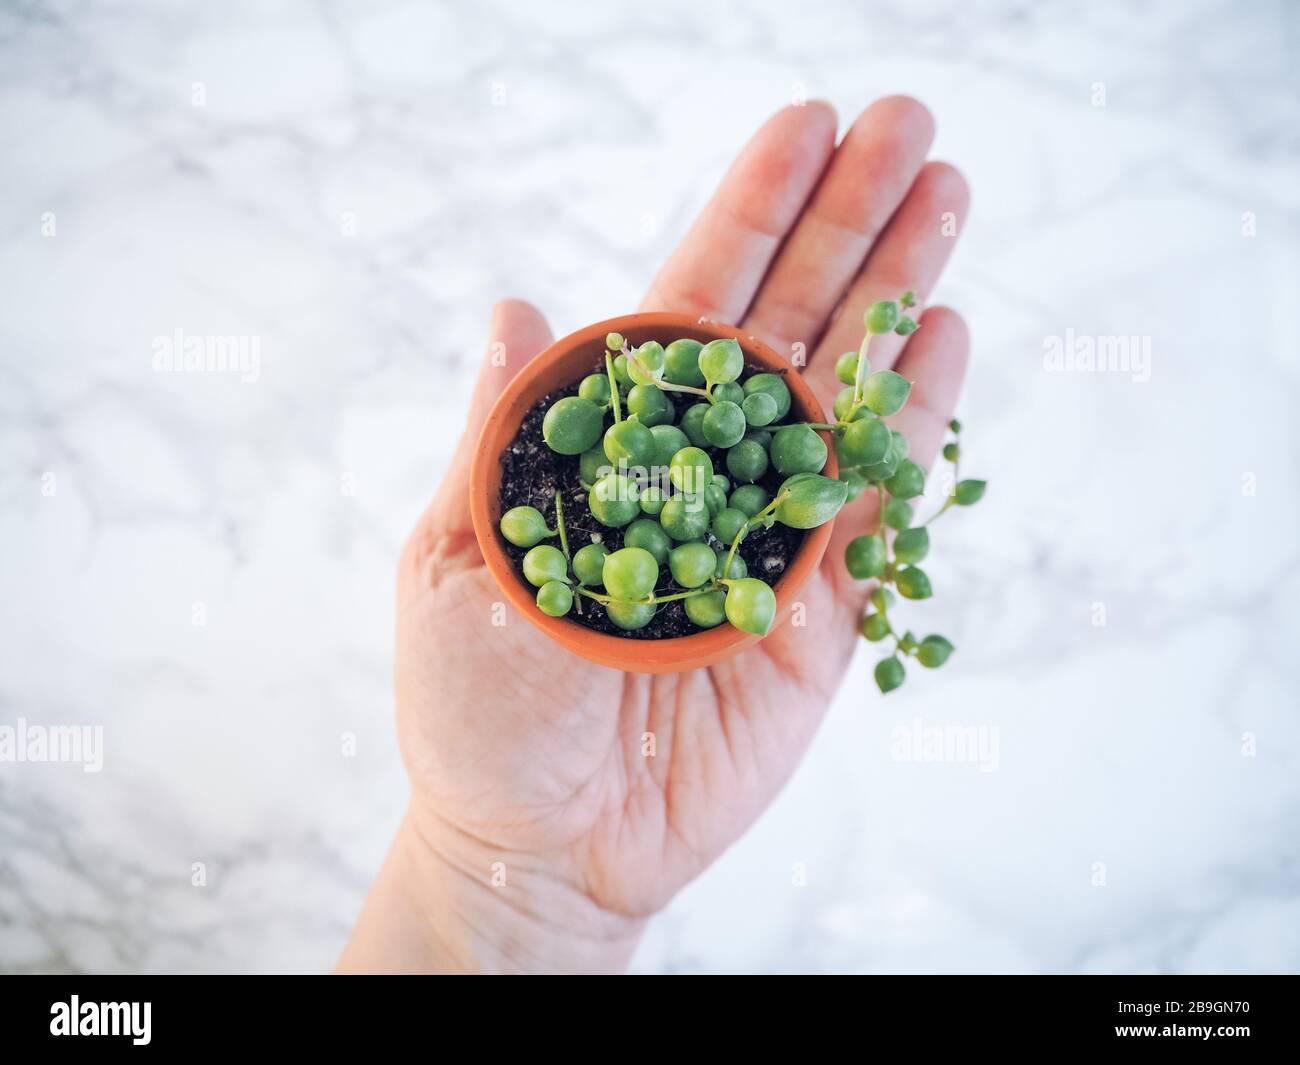 Caucasian hand holding a small terracotta pot with a senecio rowleyanus, commonly known as a string of pearls, against a white marble background Stock Photo